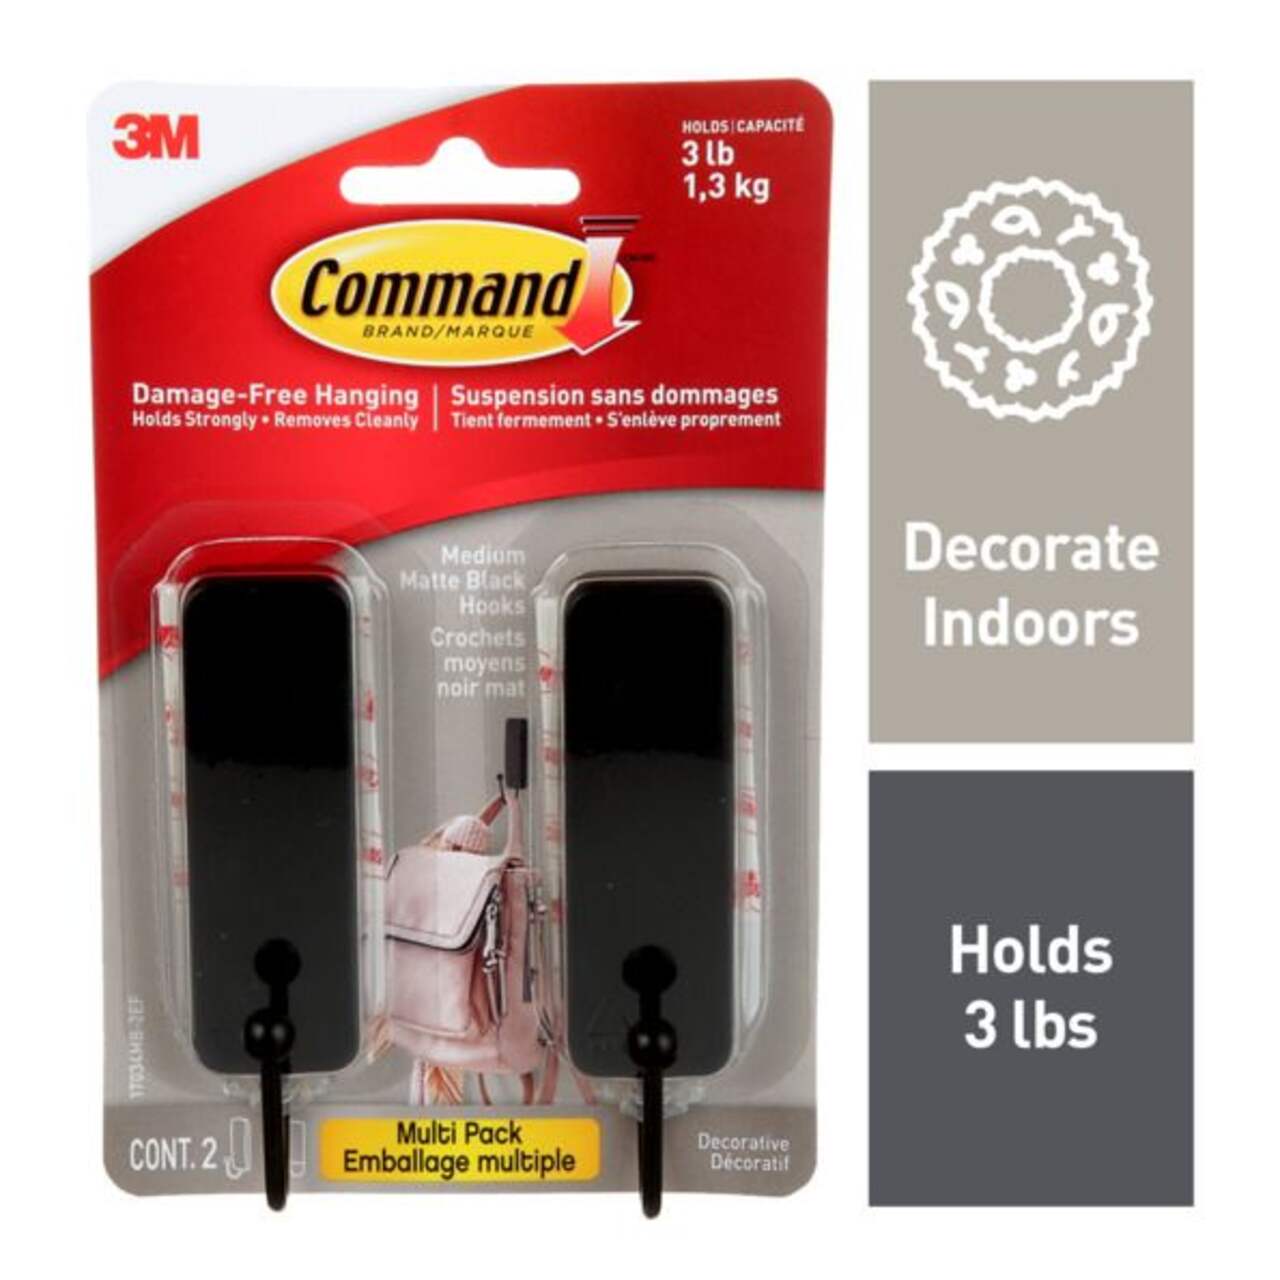 https://media-www.canadiantire.ca/product/fixing/hardware/general-hardware/0612053/command-medium-matte-black-hook-2-pack-d6eef0e9-59ad-4111-b16c-f08b2038c03a-jpgrendition.jpg?imdensity=1&imwidth=640&impolicy=mZoom